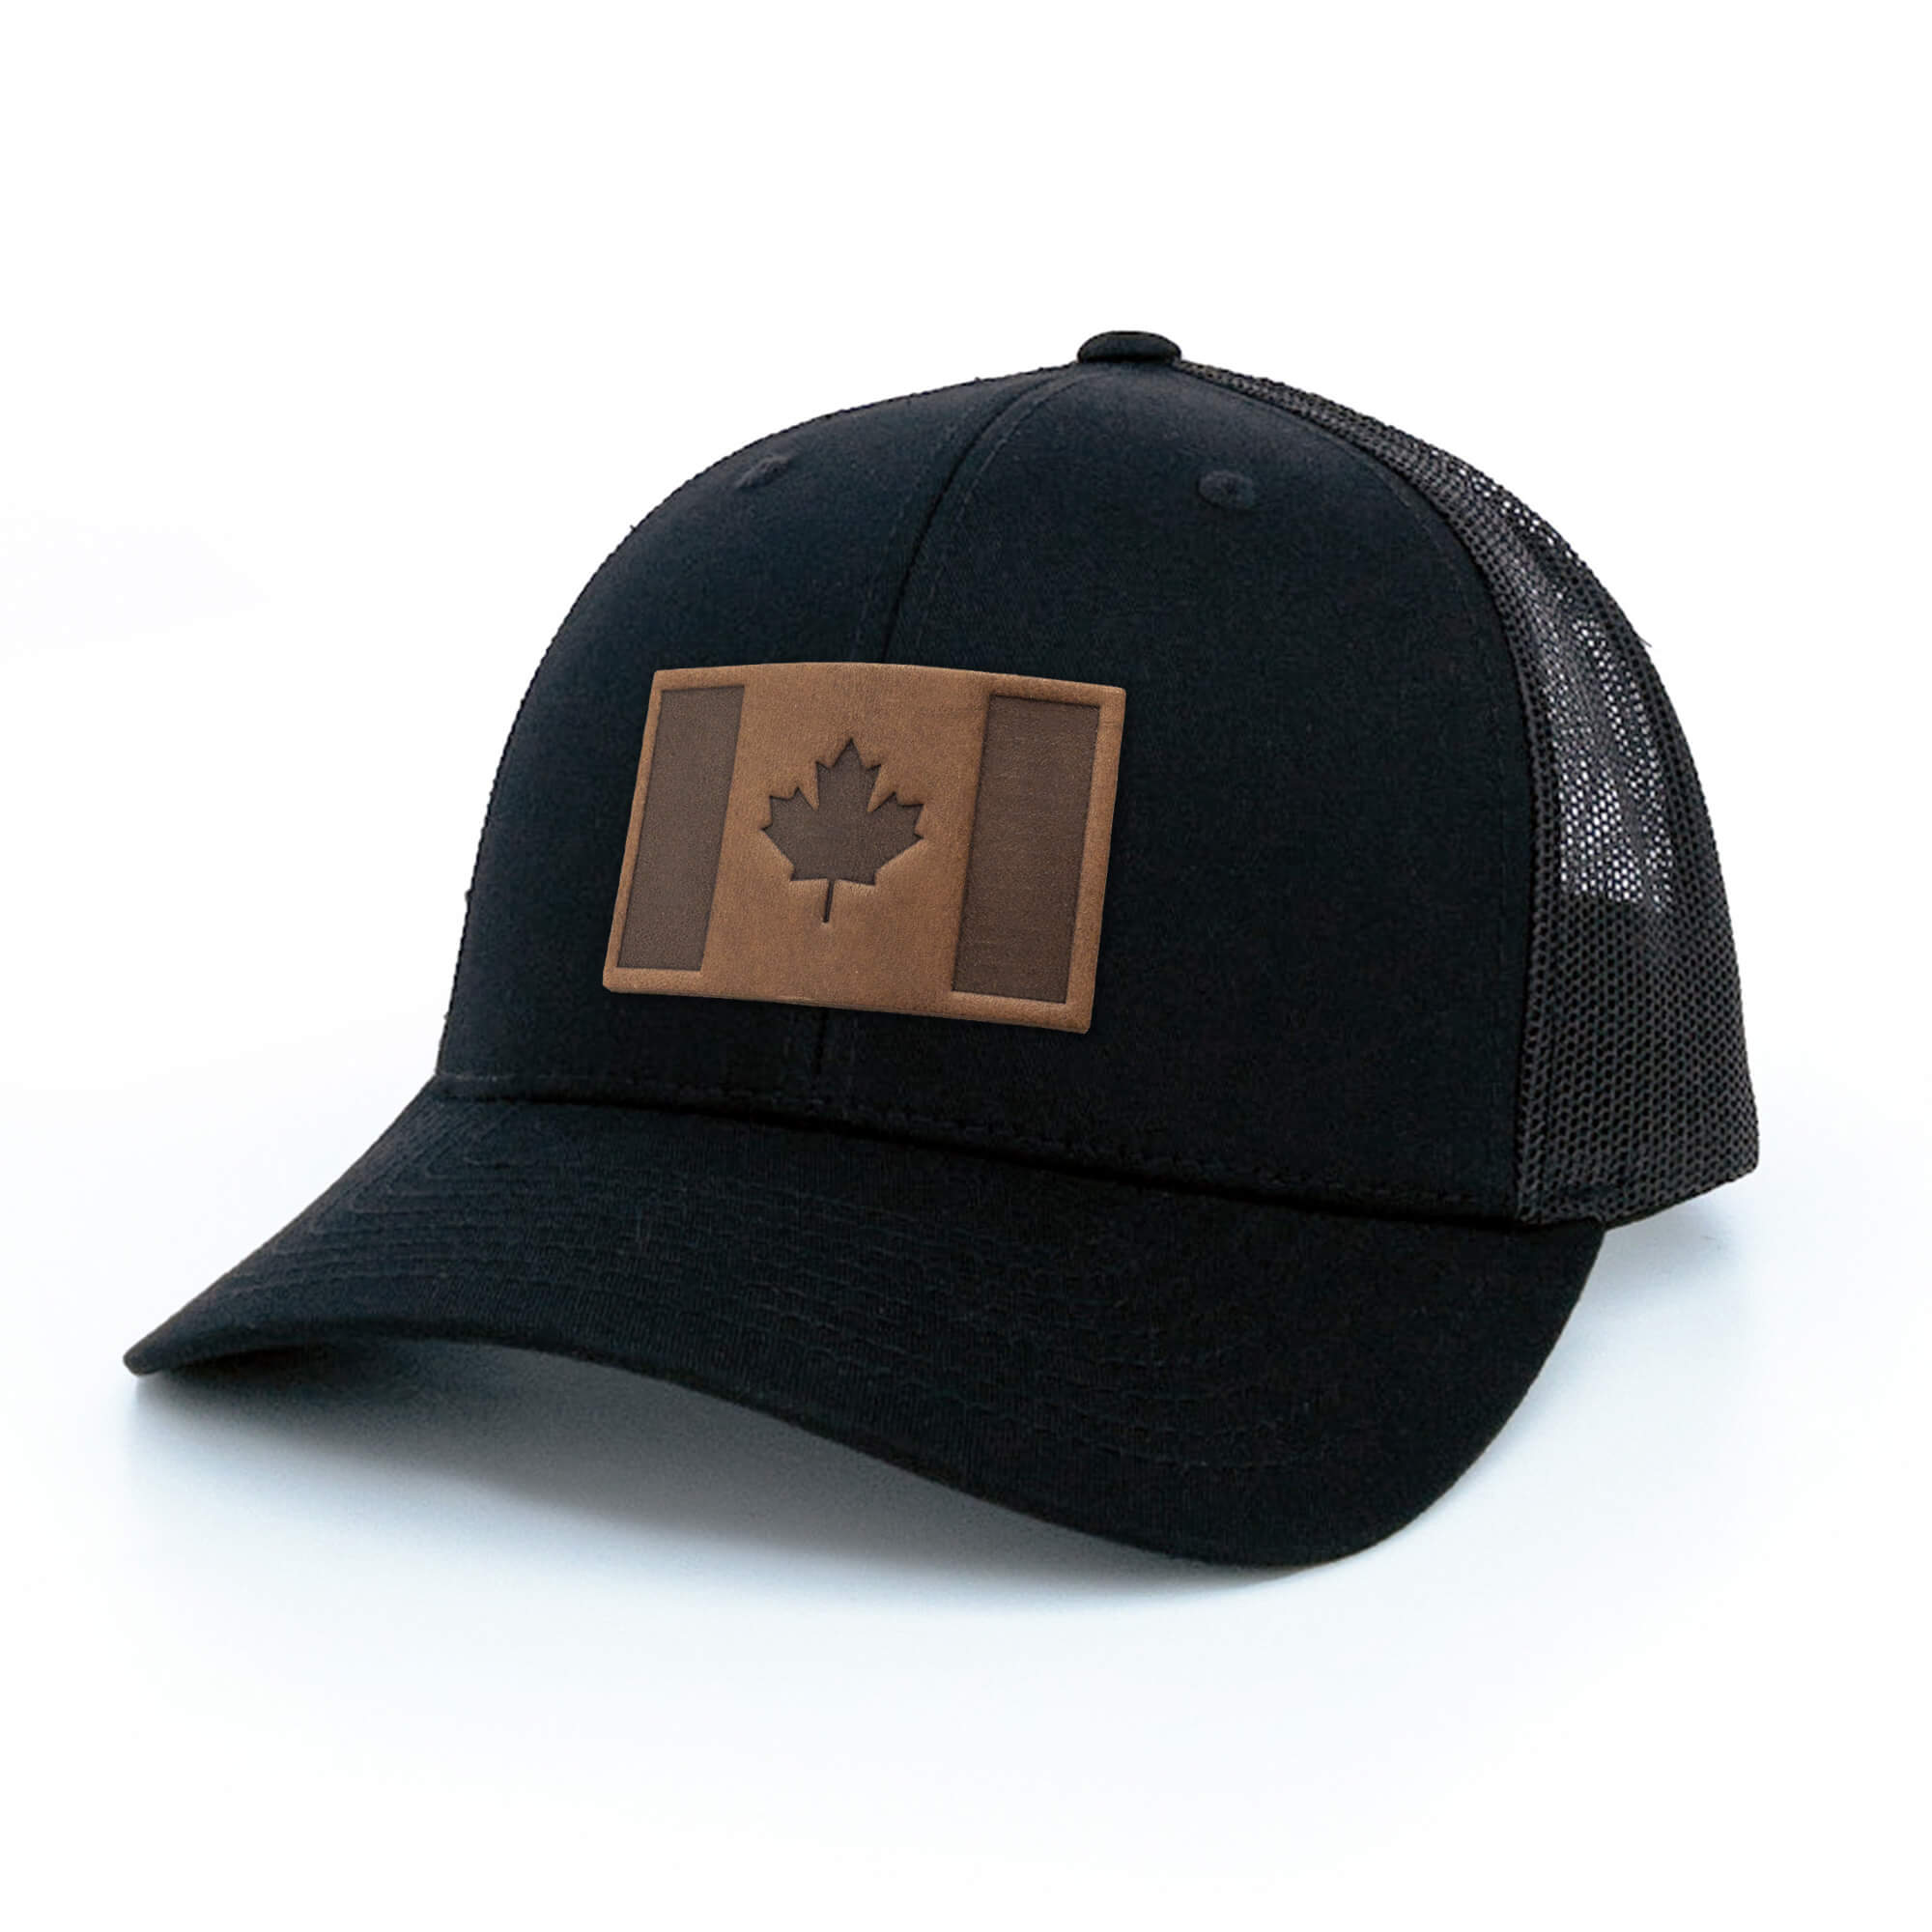 Black trucker hat with full-grain leather patch of Canada Flag | BLACK-002-009, CHARC-002-009, NAVY-002-009, HGREY-002-009, MOSS-002-009, BROWN-002-009, RED-002-009